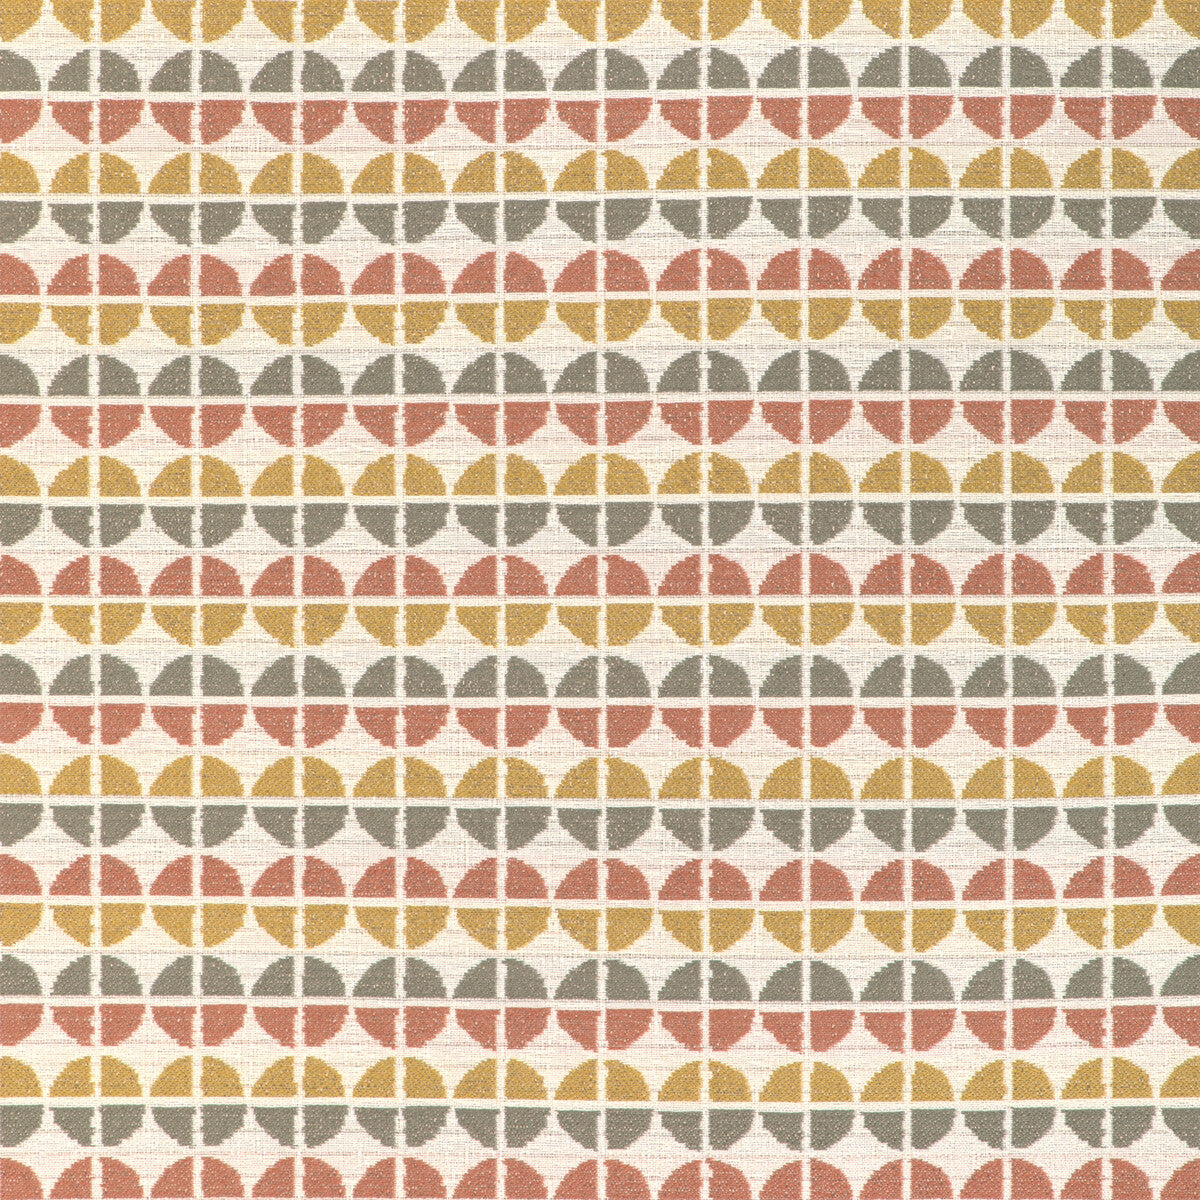 Decoy fabric in citron color - pattern 37051.2416.0 - by Kravet Contract in the Chesapeake collection